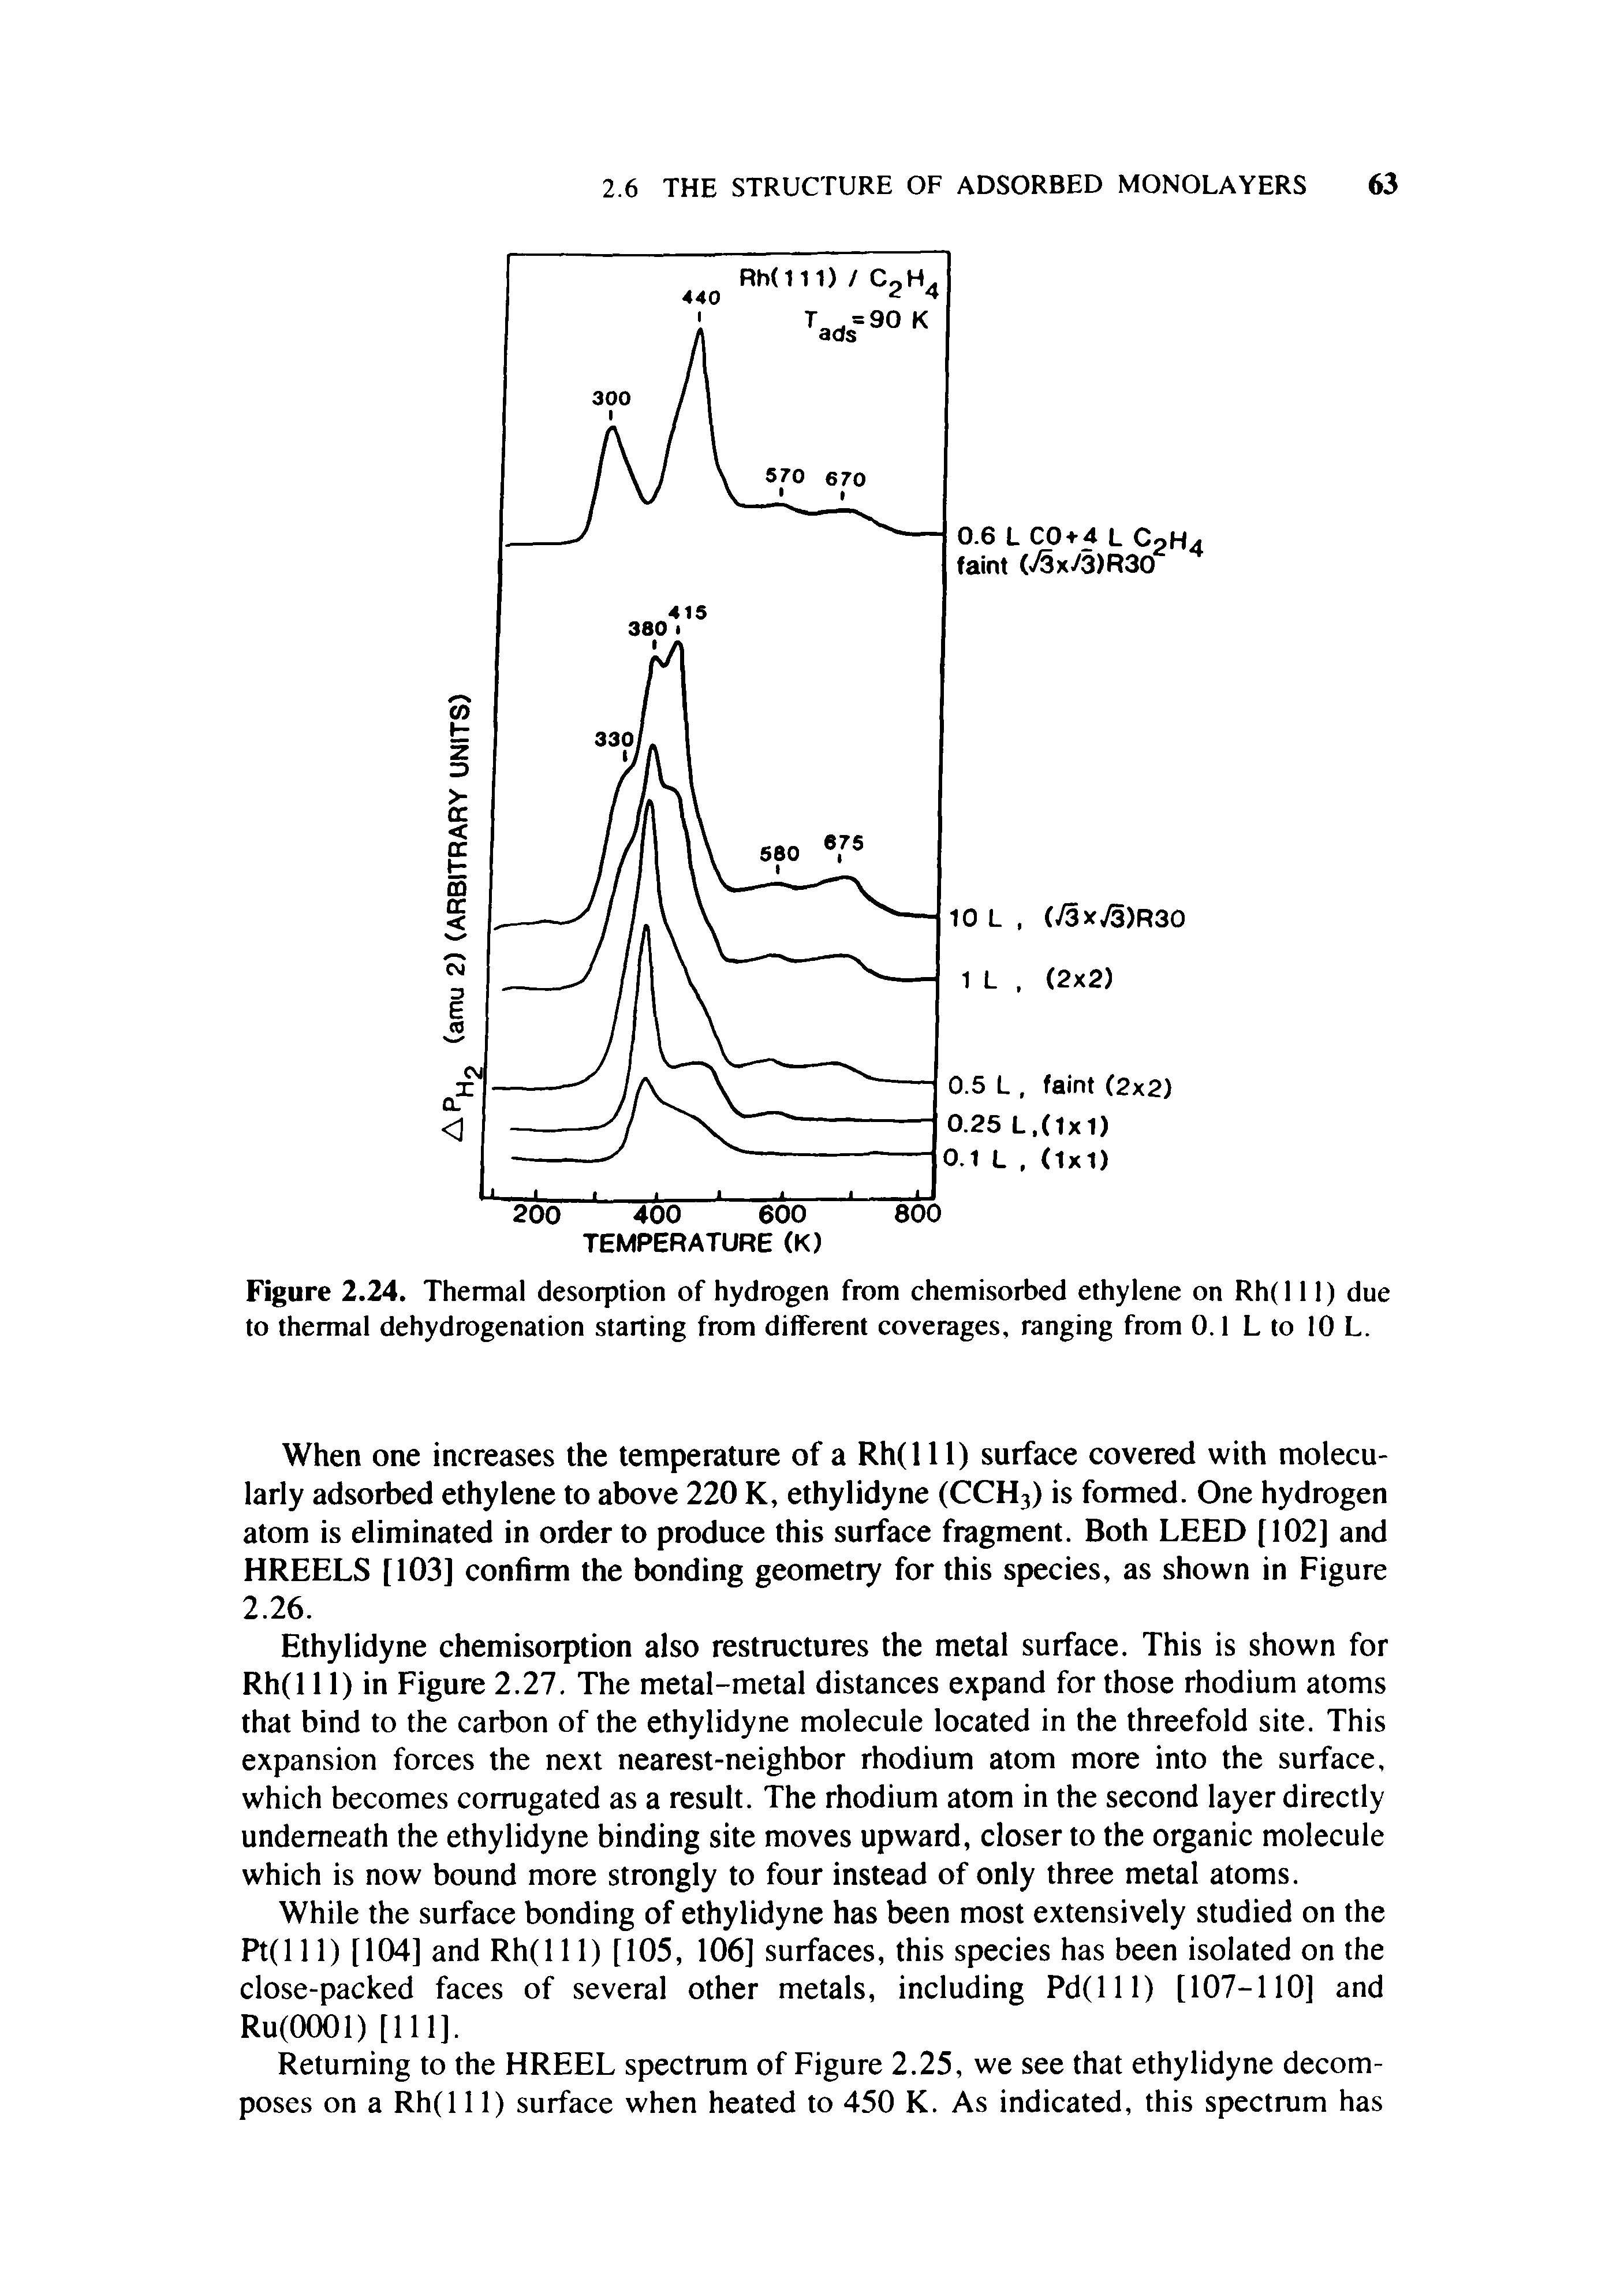 Figure 2.24. Thermal desorption of hydrogen from chemisorbed ethylene on Rh( 111) due to thermal dehydrogenation starting from different coverages, ranging from 0.1 L to 10 L.